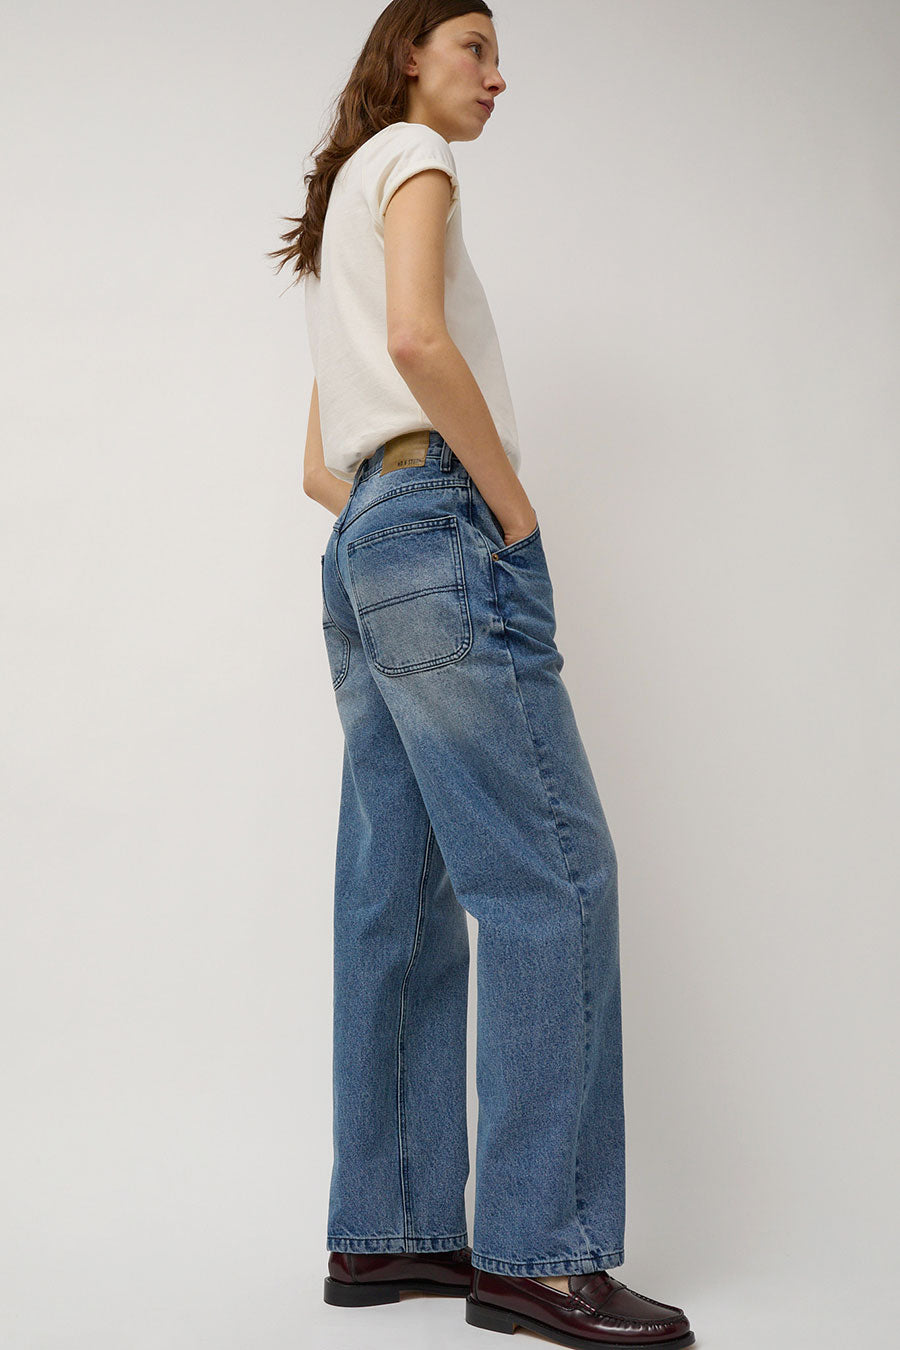 Regular Inseam Jeans, Avery Mae Boutique